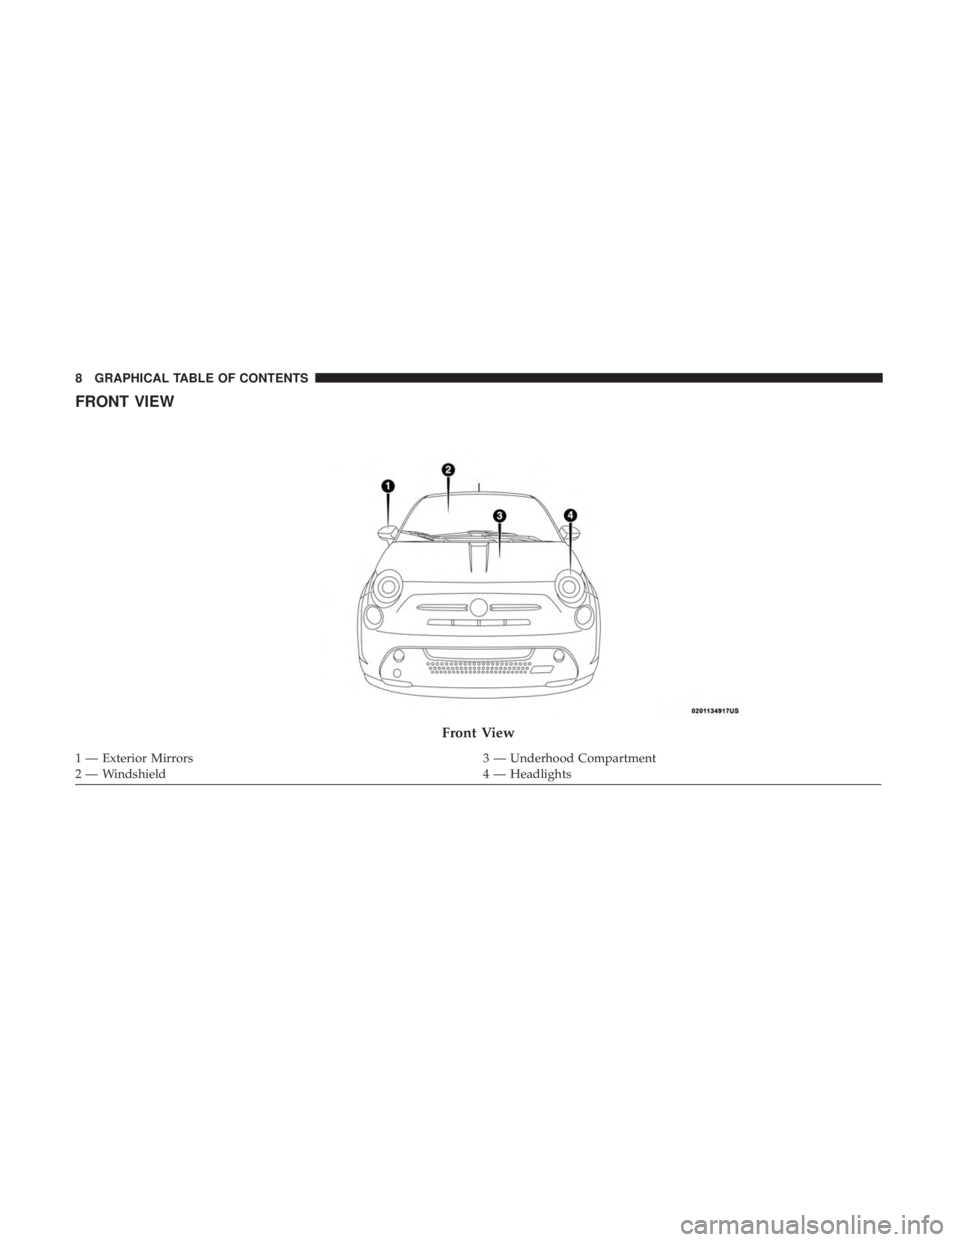 FIAT 500E 2019  Owners Manual FRONT VIEW
Front View
1 — Exterior Mirrors3 — Underhood Compartment
2 — Windshield 4 — Headlights
8 GRAPHICAL TABLE OF CONTENTS 